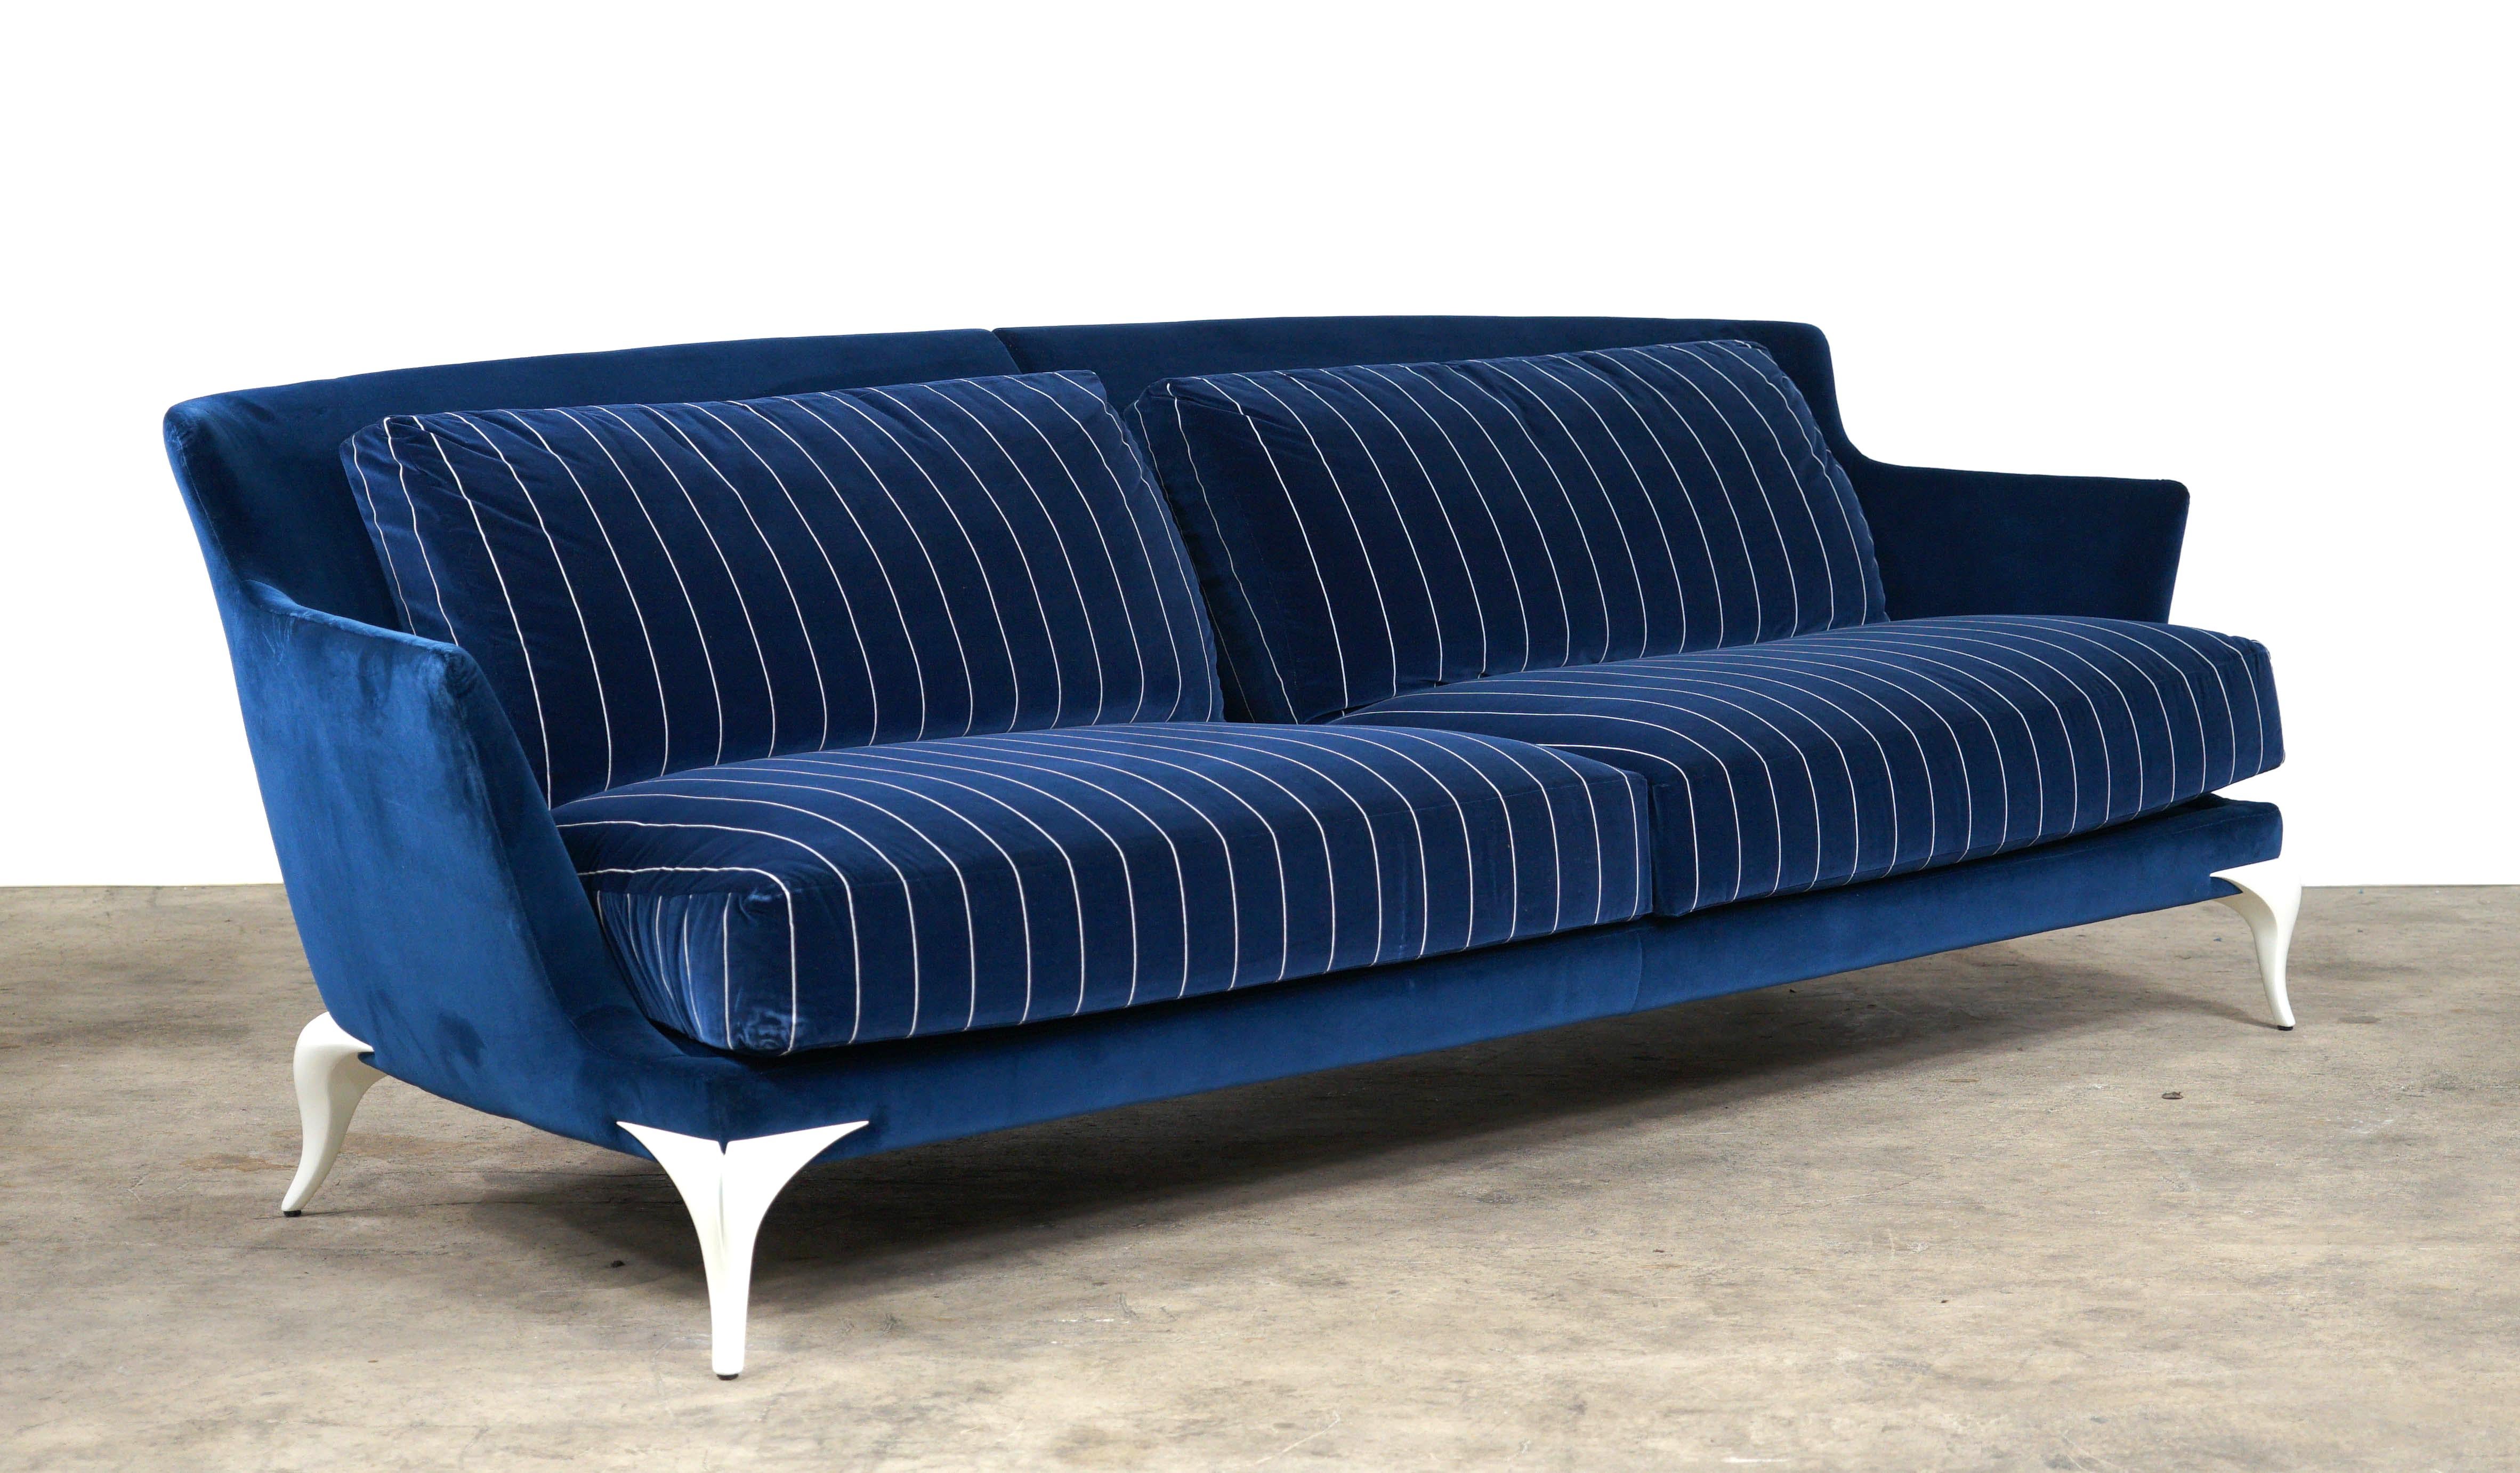 Slender and refined, the Contour brilliantly brings together a sober spirit with contemporary taste. It is upholstered in royal blue velvet, with an additional detail of white pinstriping added to the seat and back cushions. Contrasting white